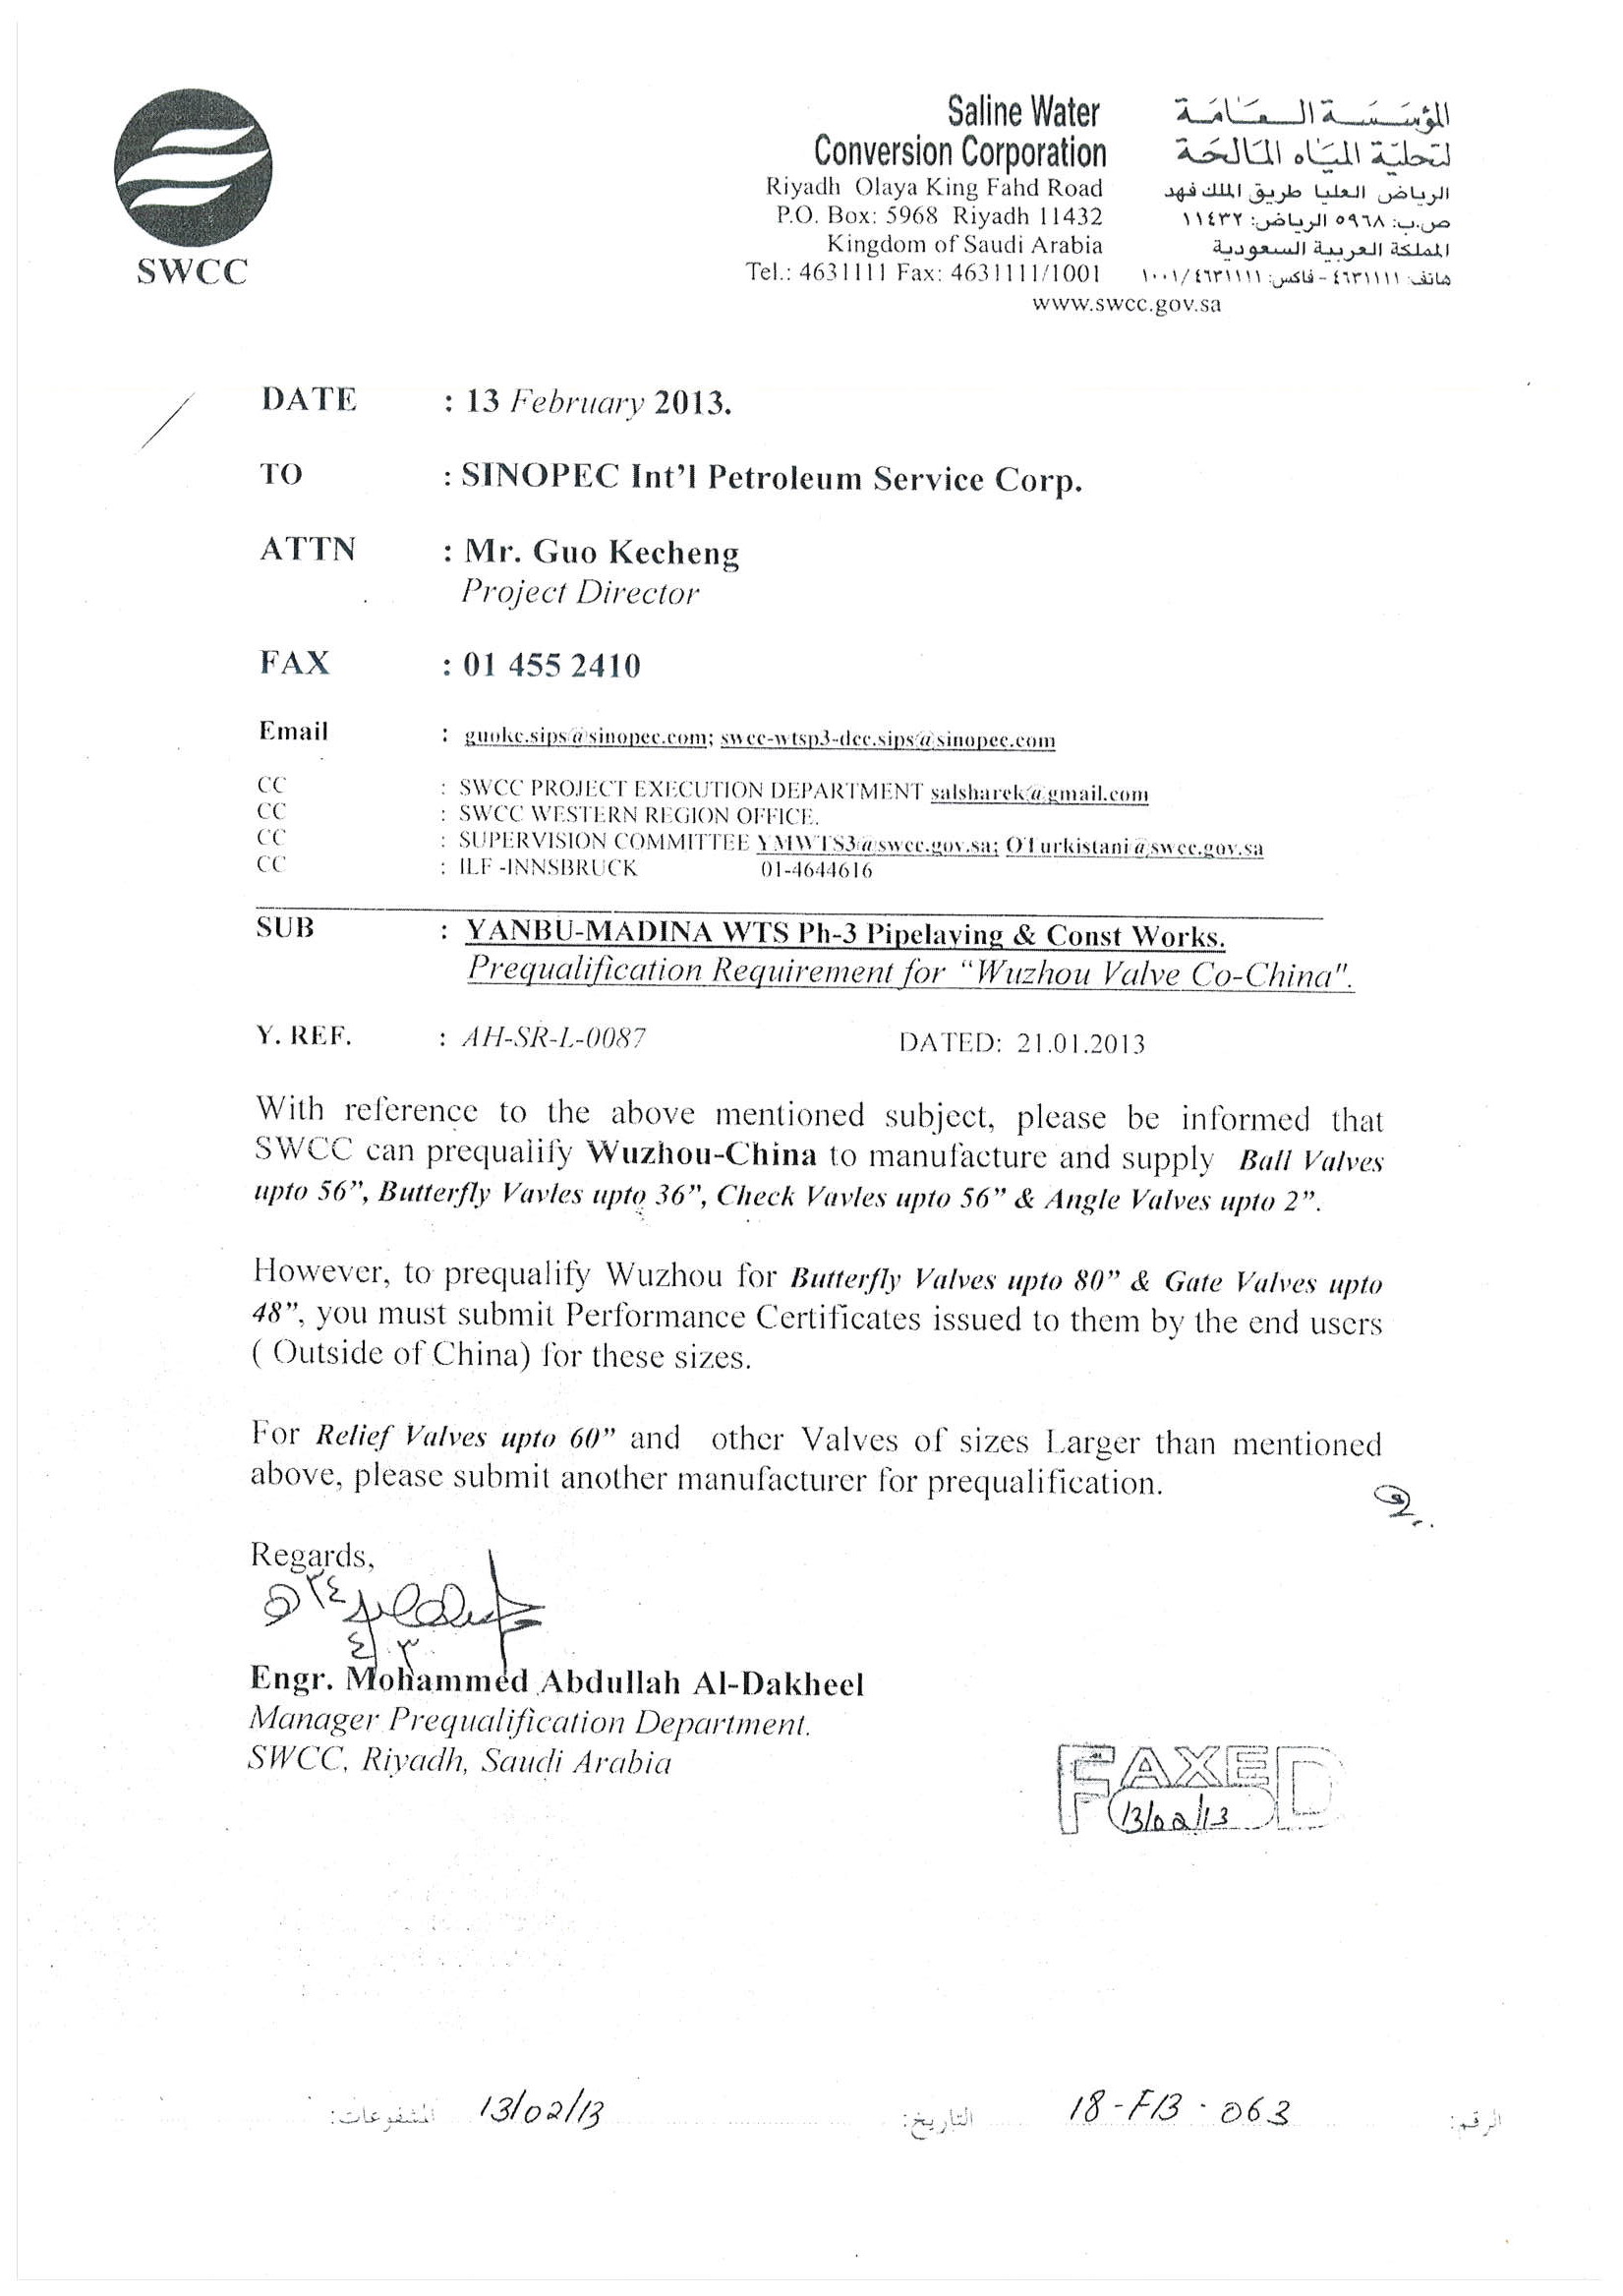 SWCC Approval Letter